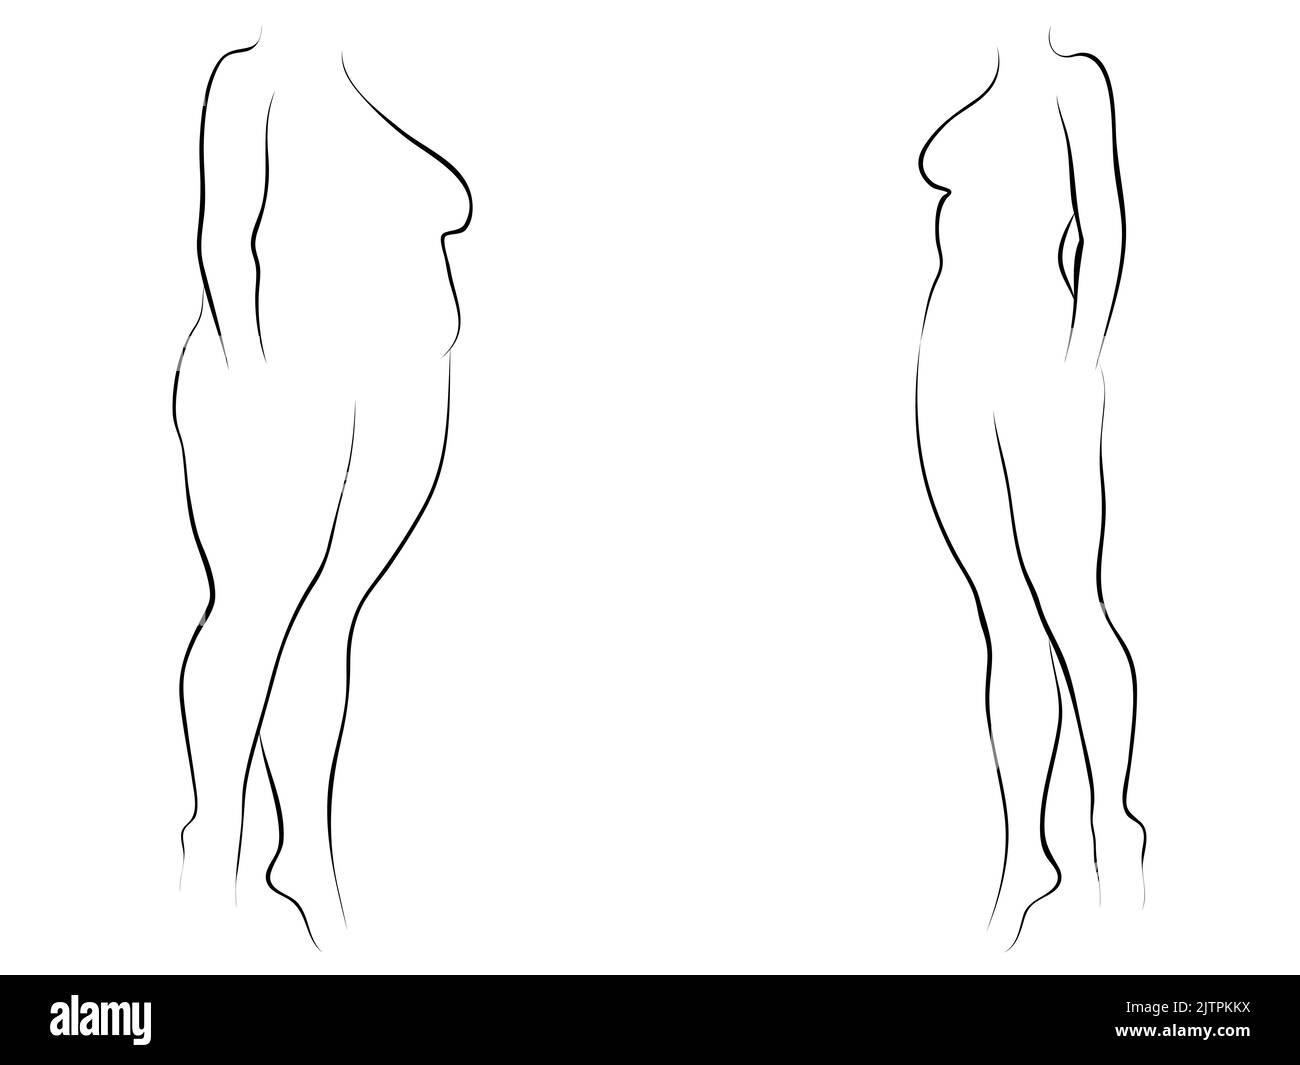 Conceptual fat overweight female vs slim fit healthy body after weight loss or diet with muscles thin young woman. 3D illustration for fitness, nutrit Stock Photo